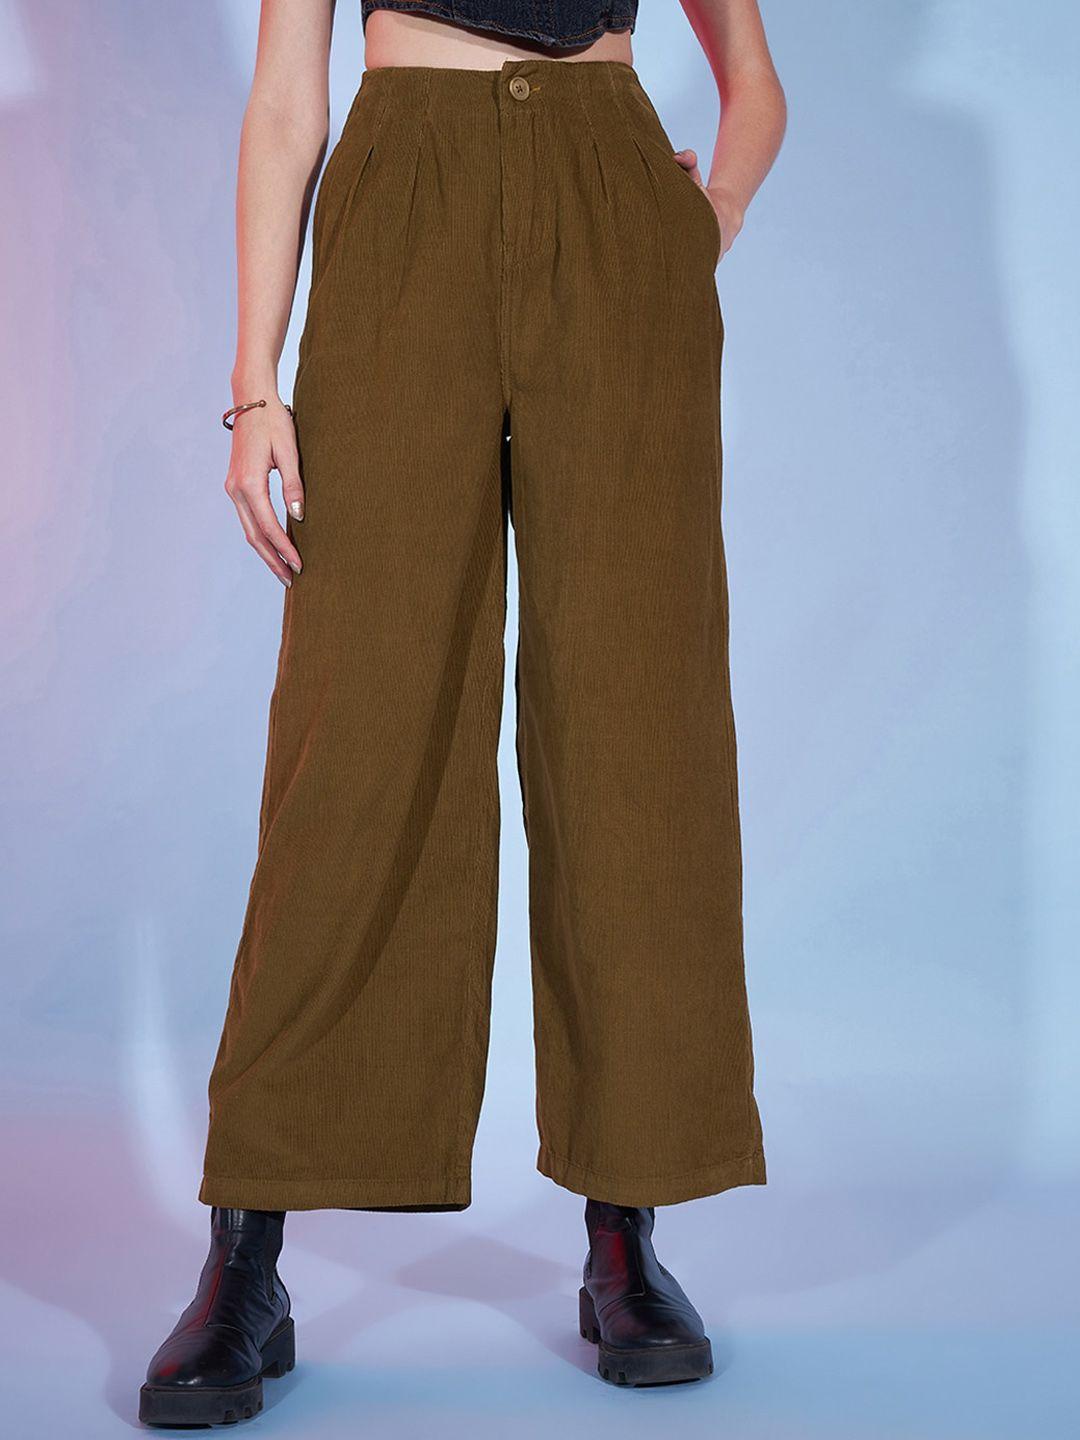 river of design jeans women high-rise corduroy trousers